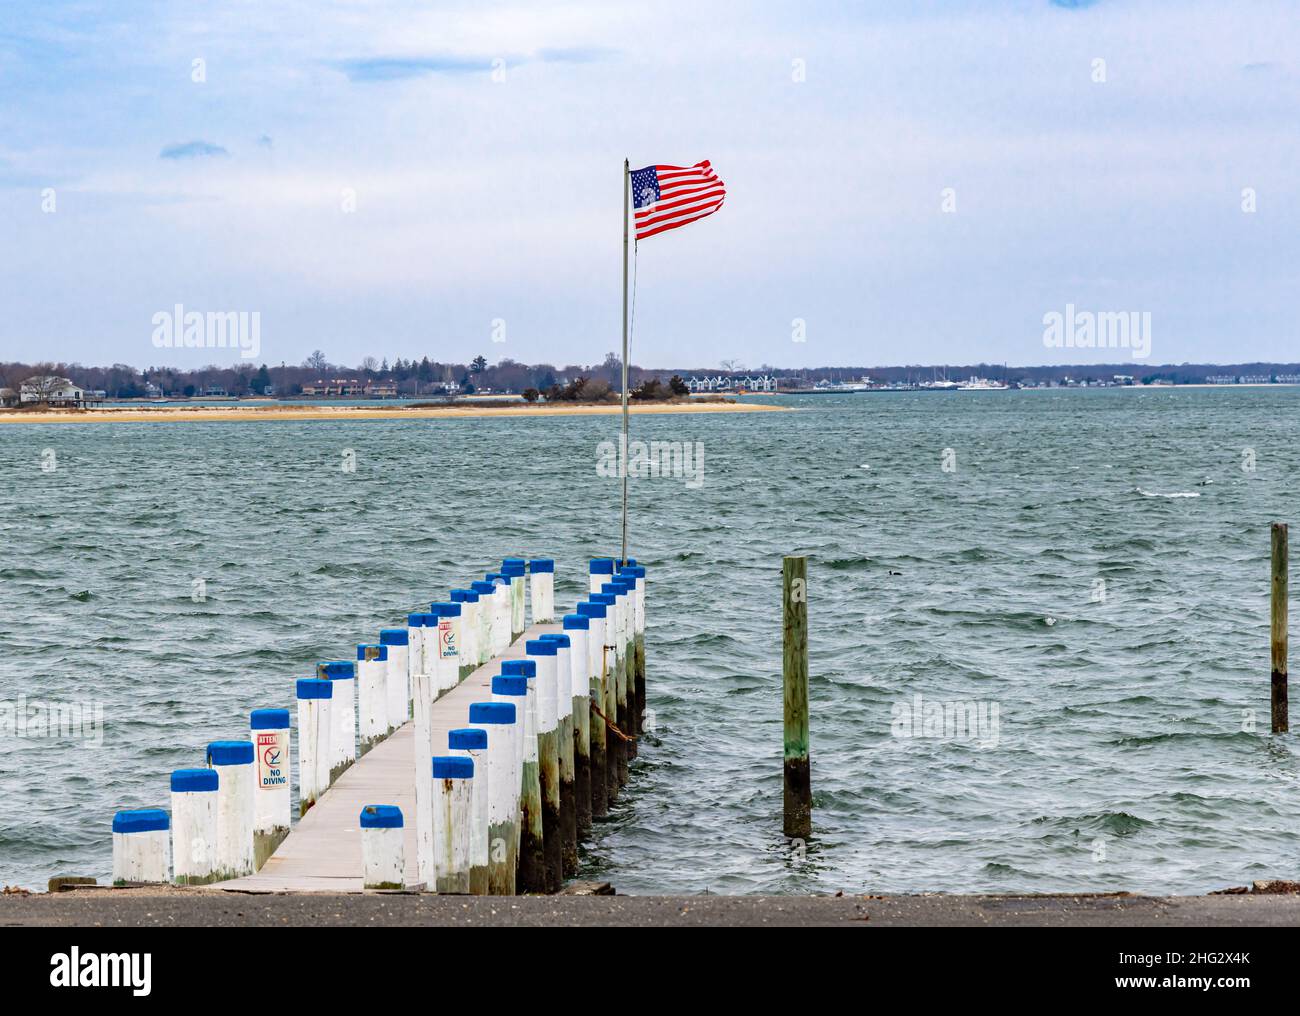 Dock with a flag at the end Stock Photo